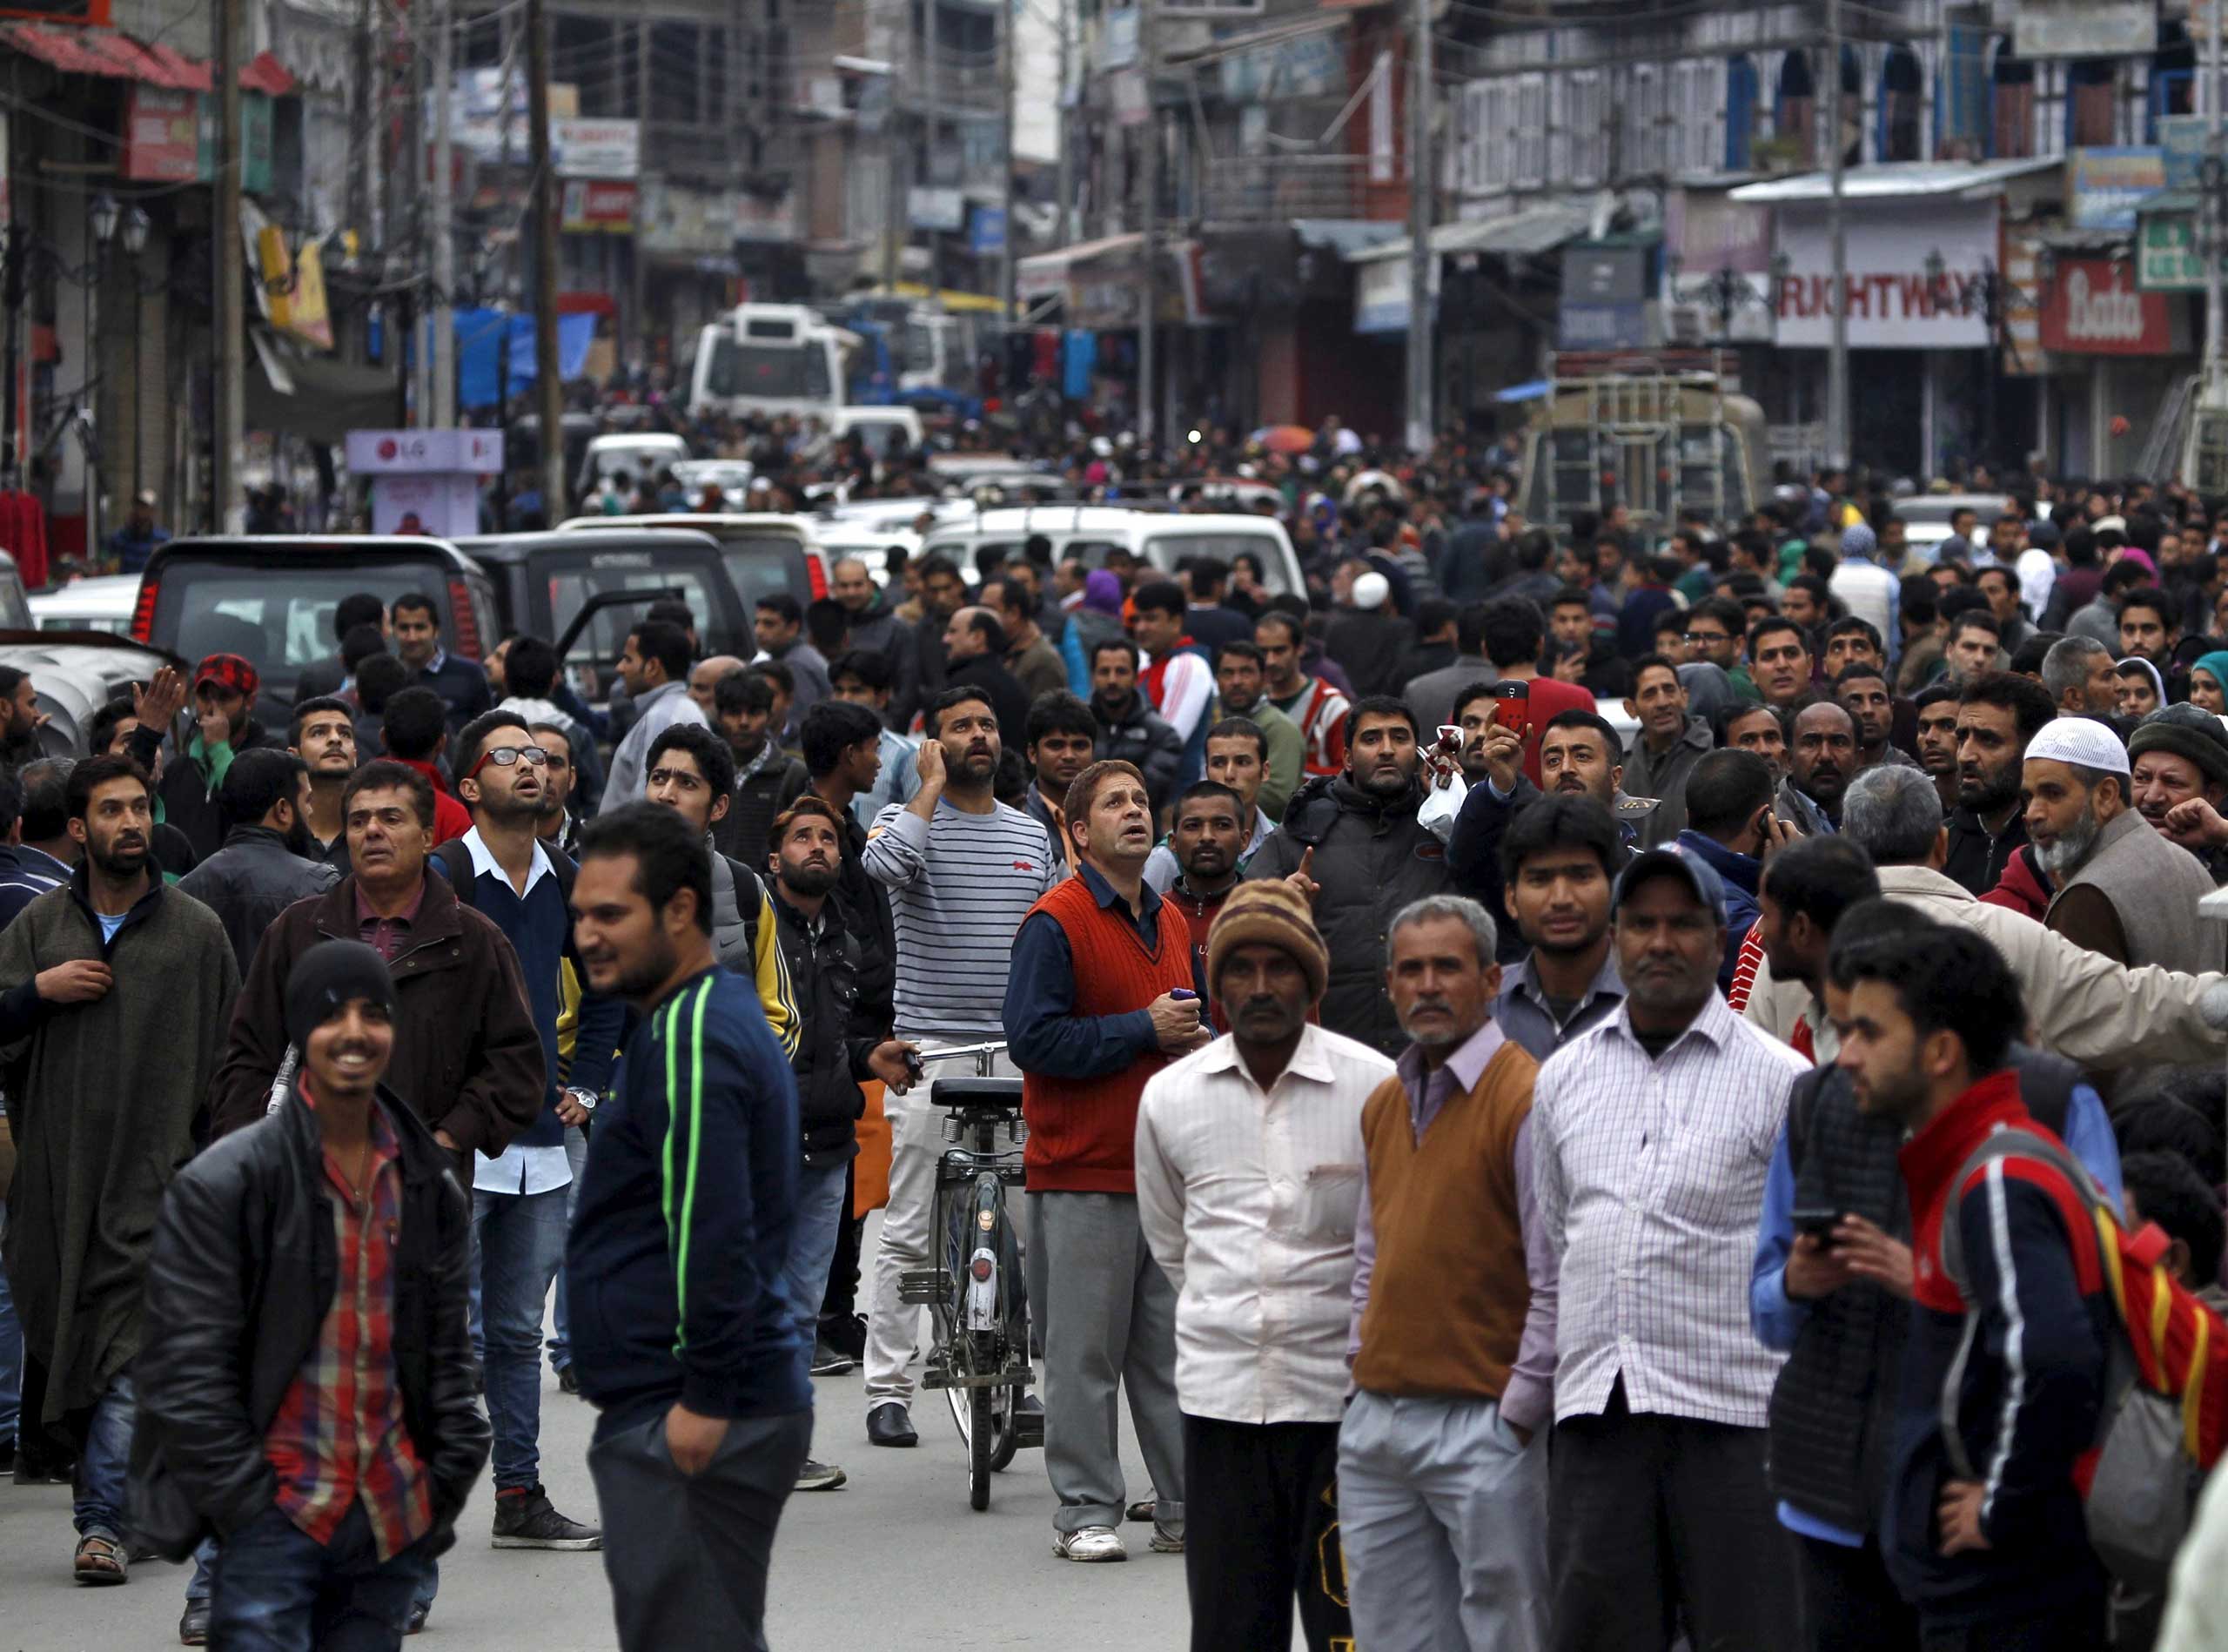 People stand on a road after vacating buildings following an earthquake in Srinagar, India, on Oct. 26, 2015.